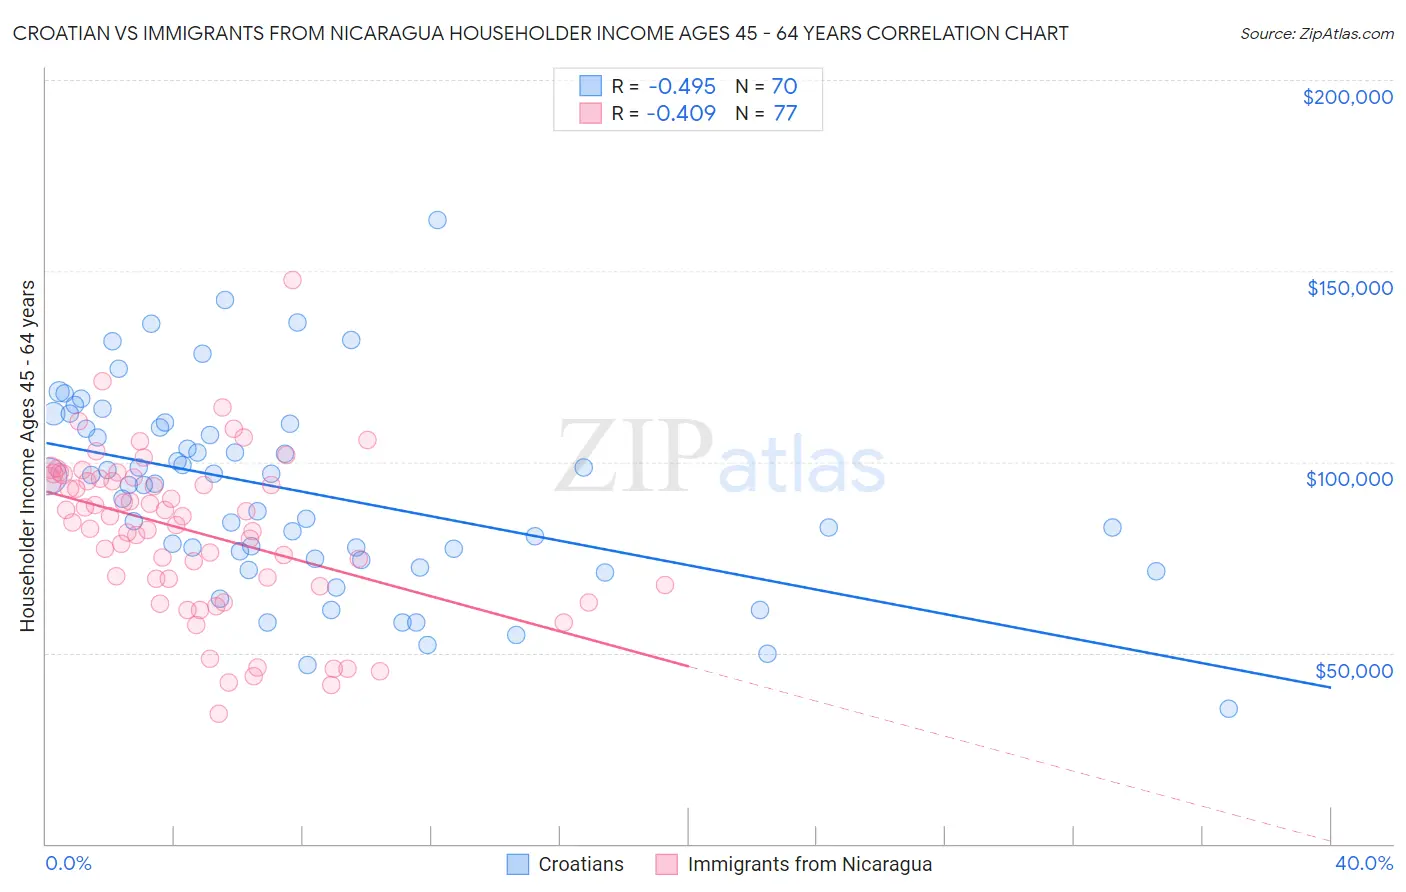 Croatian vs Immigrants from Nicaragua Householder Income Ages 45 - 64 years